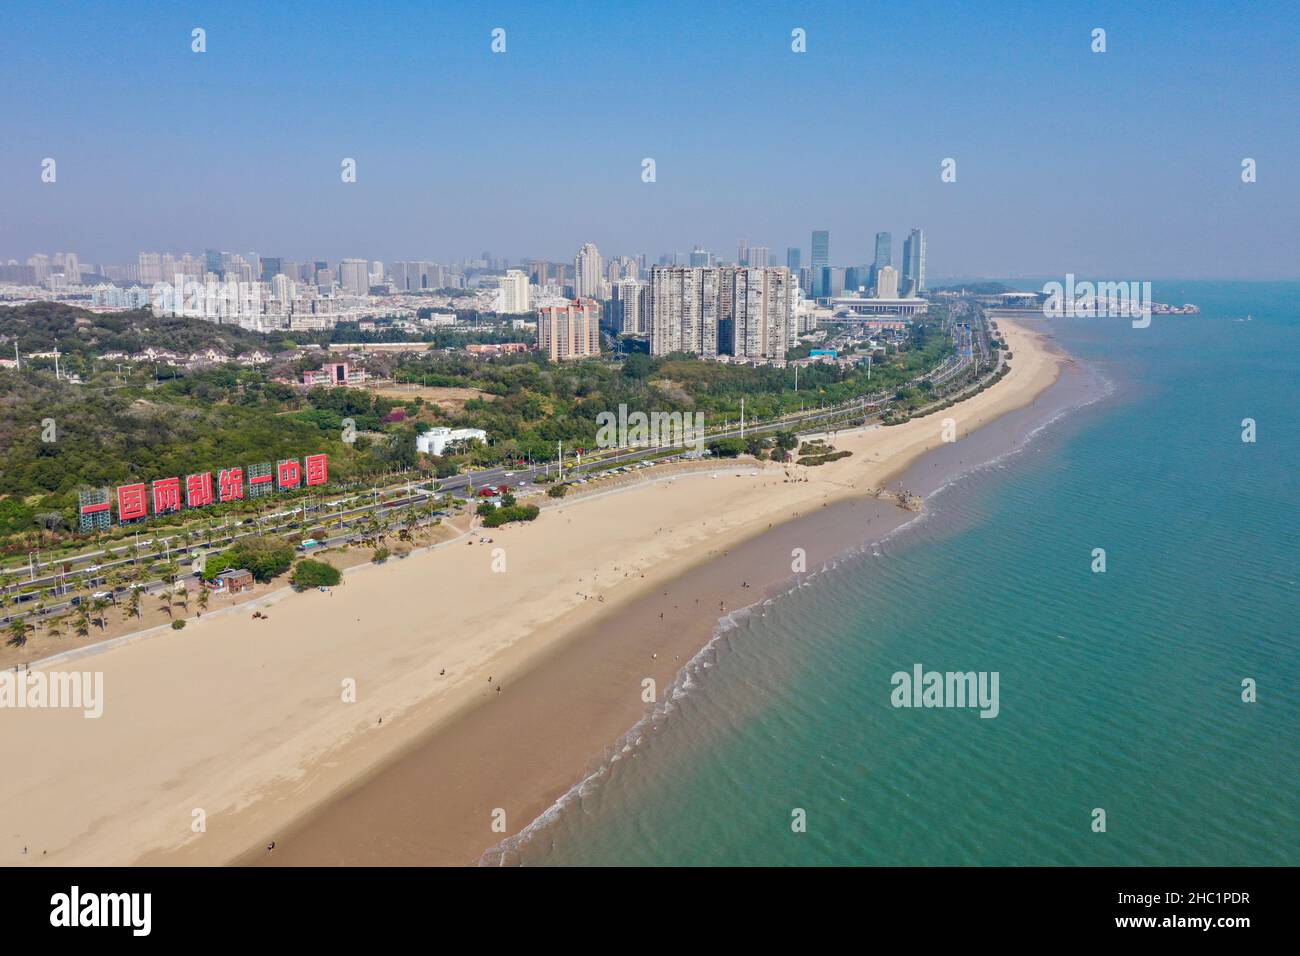 (211221) -- XIAMEN, Dec. 21, 2021 (Xinhua) -- Aerial photo taken on Dec. 12, 2021 shows the coastal view of Xiamen, southeast China's Fujian Province. This year marks the 40th anniversary of the establishment of the Xiamen Special Economic Zone (SEZ). The Xiamen SEZ has made important contributions to the country's reform, opening up, and socialist modernization, and played a unique role in promoting national reunification. (Xinhua/Jiang Kehong) Stock Photo